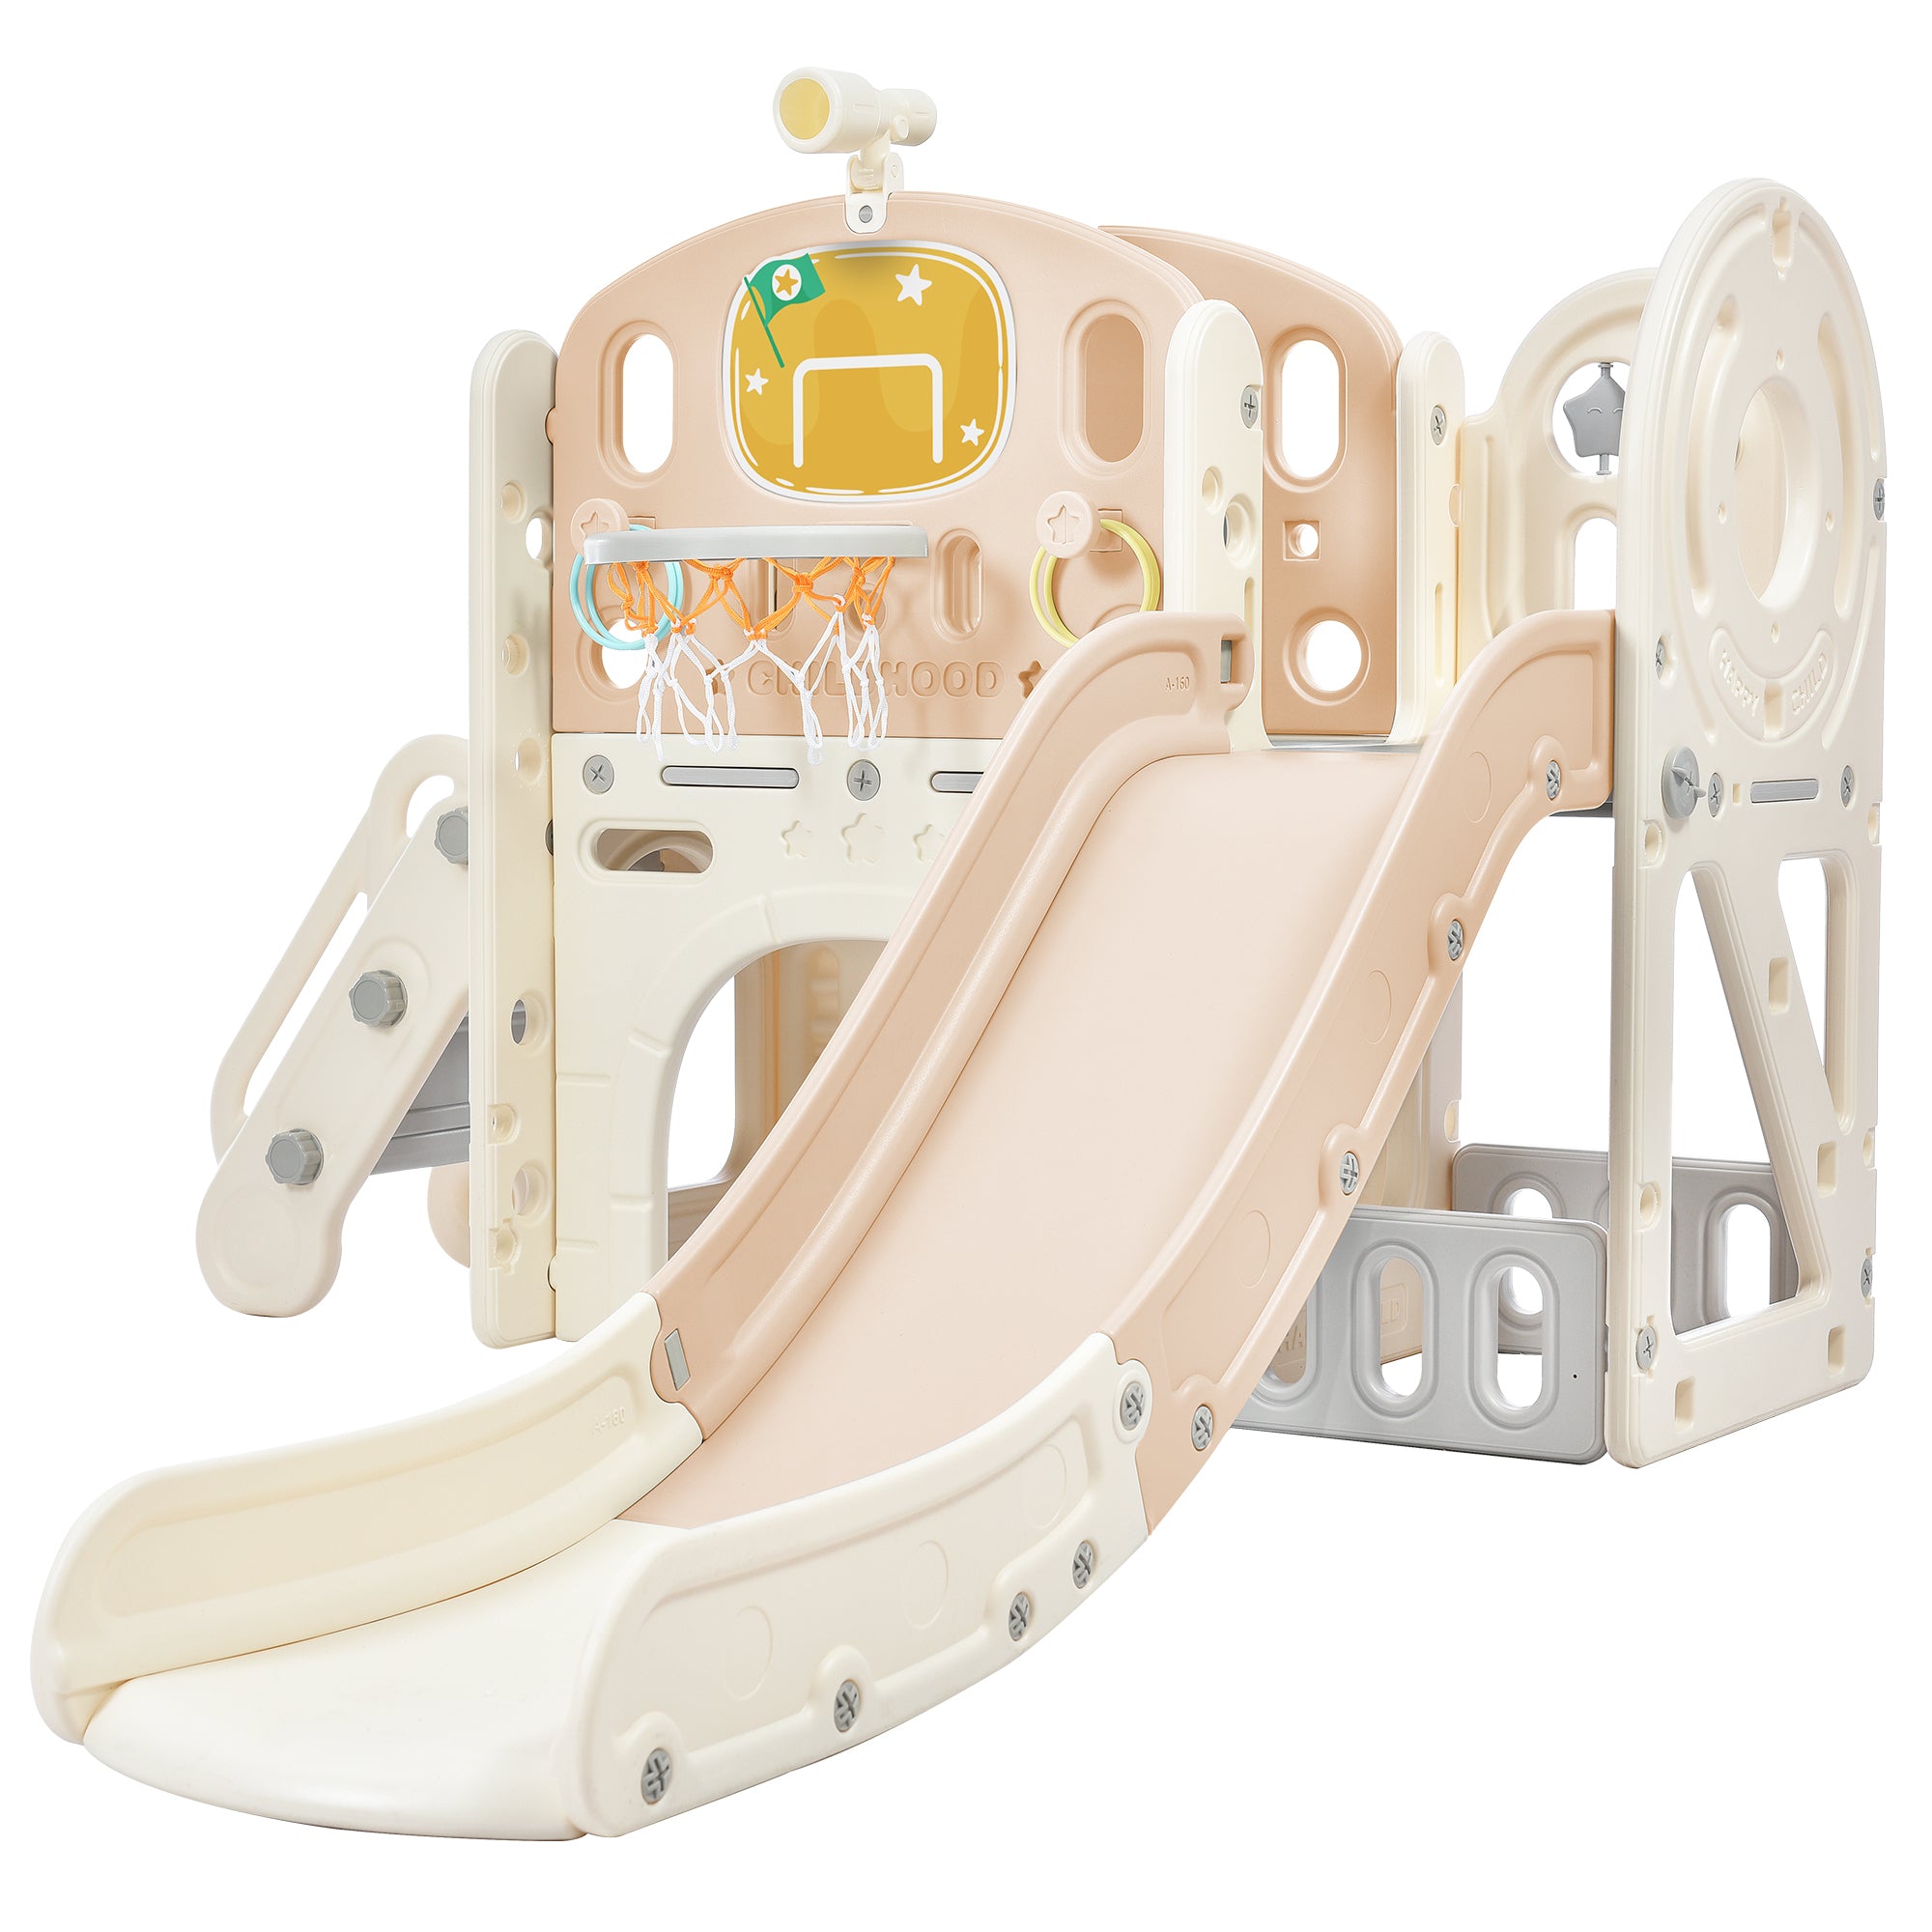 Kids Slide Playset Structure, Freestanding Castle Climbing Crawling Playhouse with Slide, Arch Tunnel, Ring Toss, and Basketball Hoop, Toy Storage Organizer for Toddlers, Kids Climbers Playground